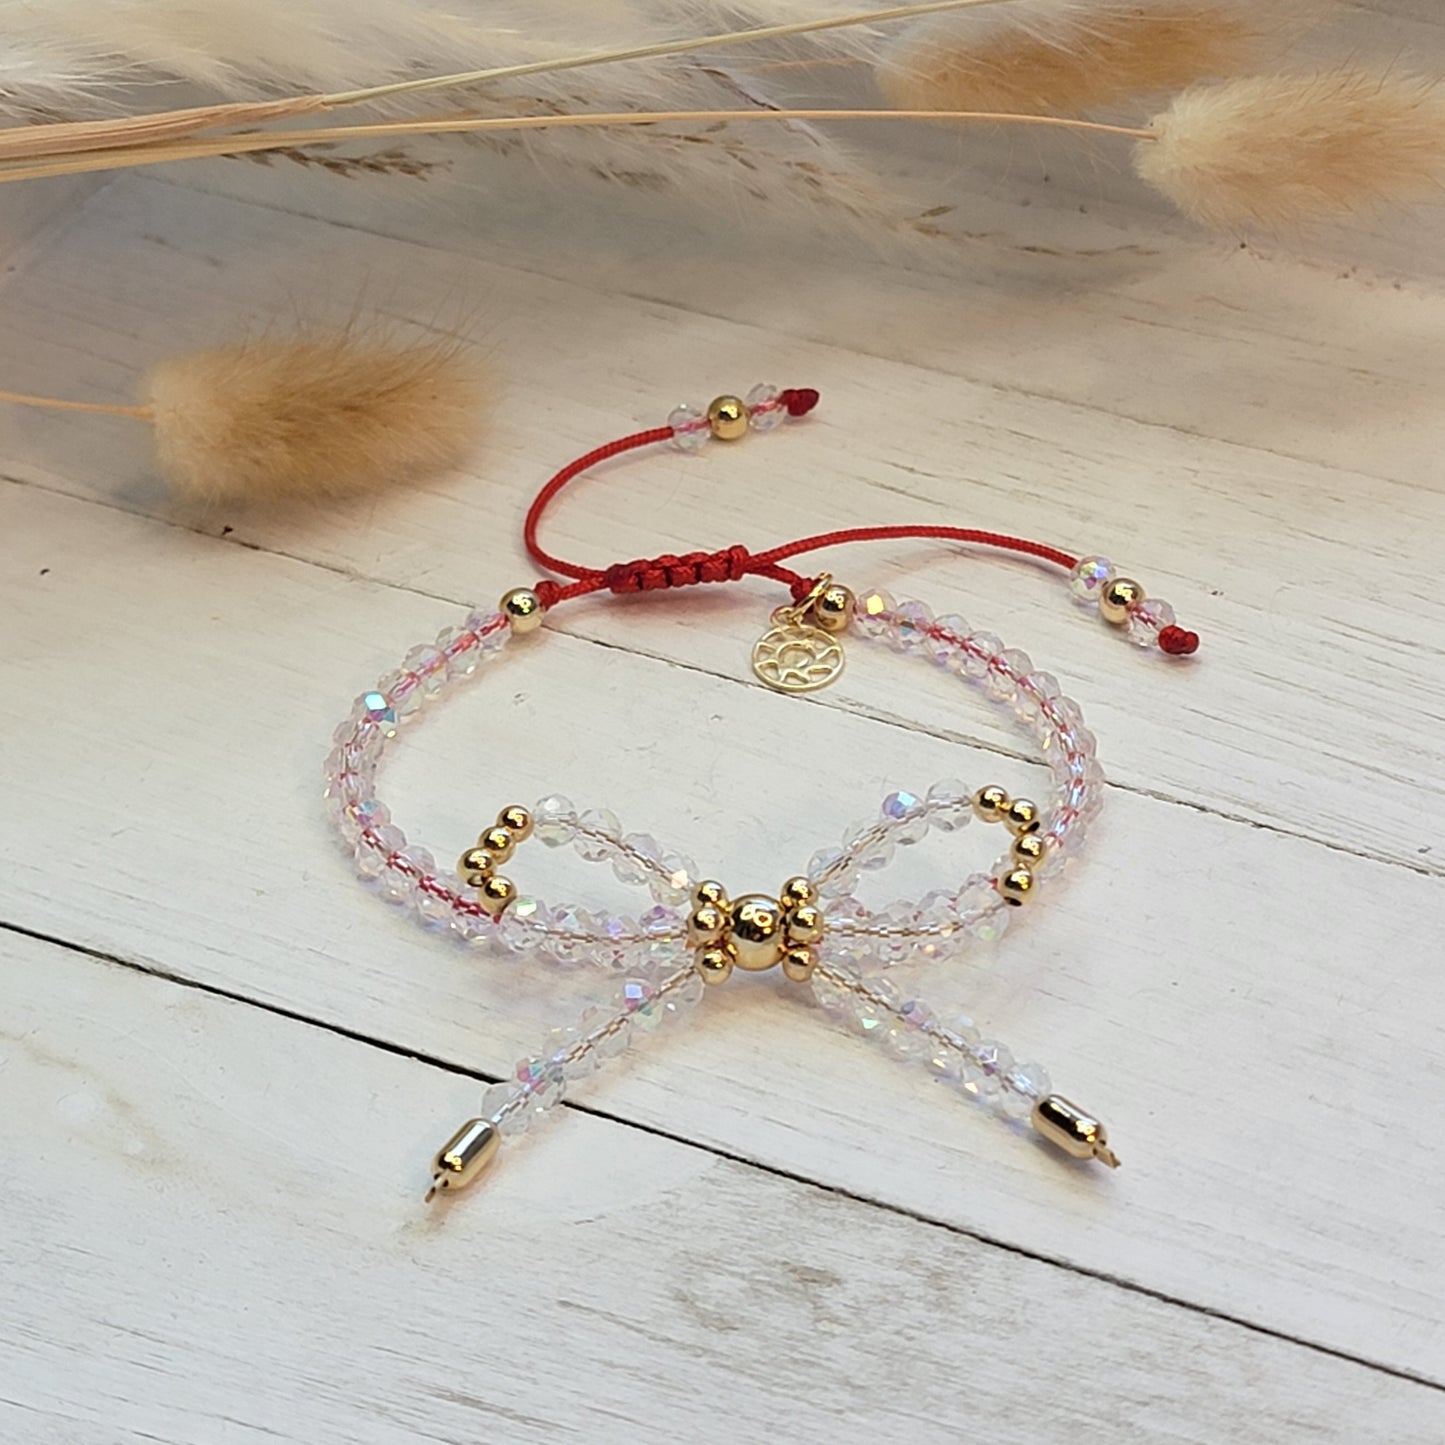 Adjustable Bow Crystal Bracelet with Red Cord